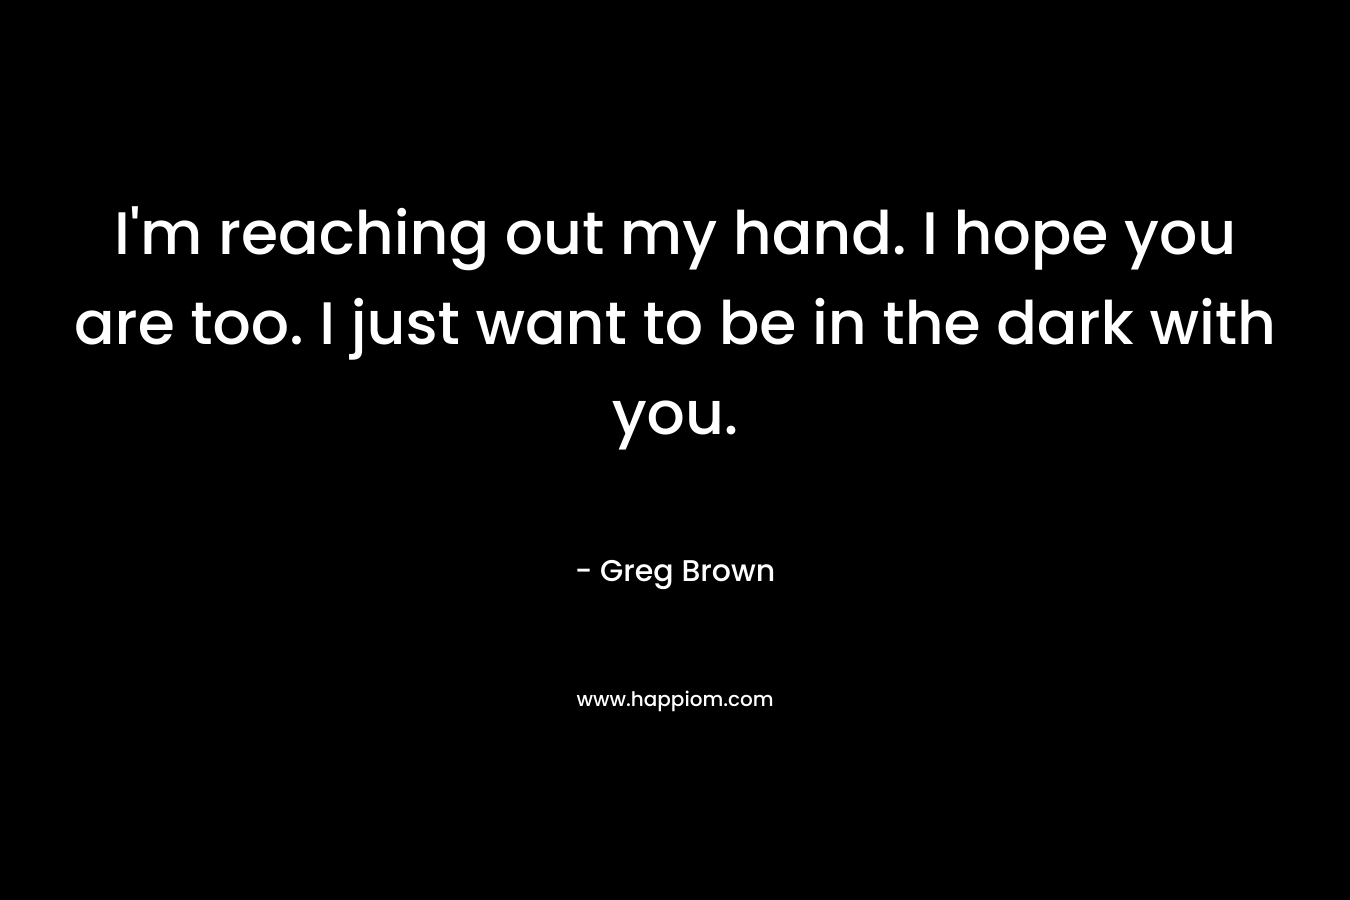 I'm reaching out my hand. I hope you are too. I just want to be in the dark with you.